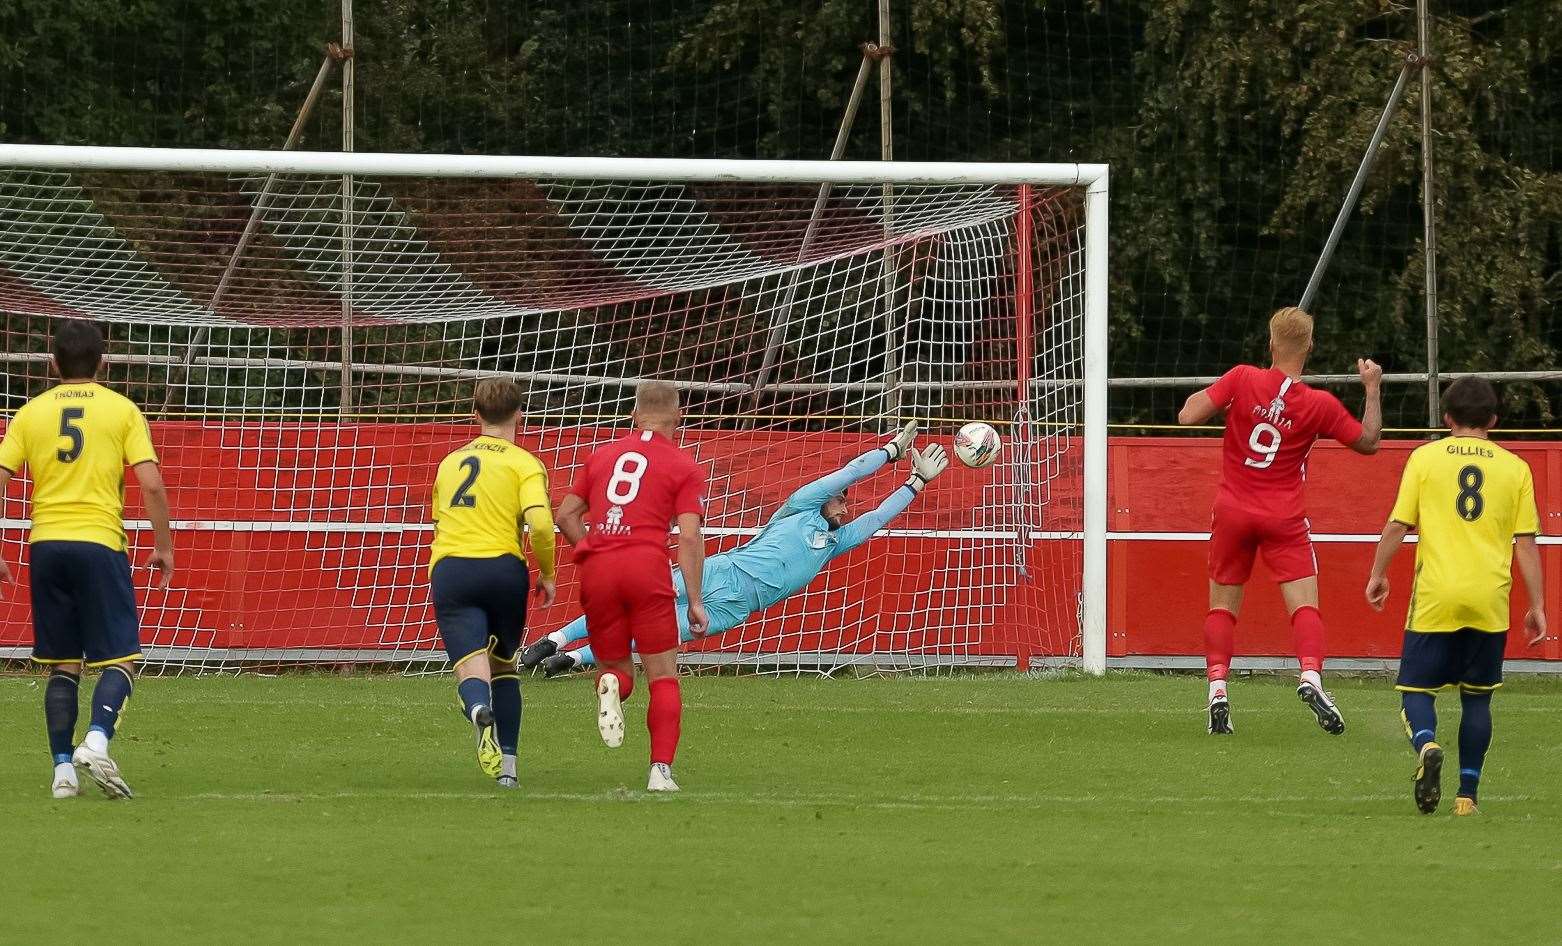 Dan Eason can’t quite keep out two-goal Trevor McCreadie’s penalty. Picture: Les Biggs